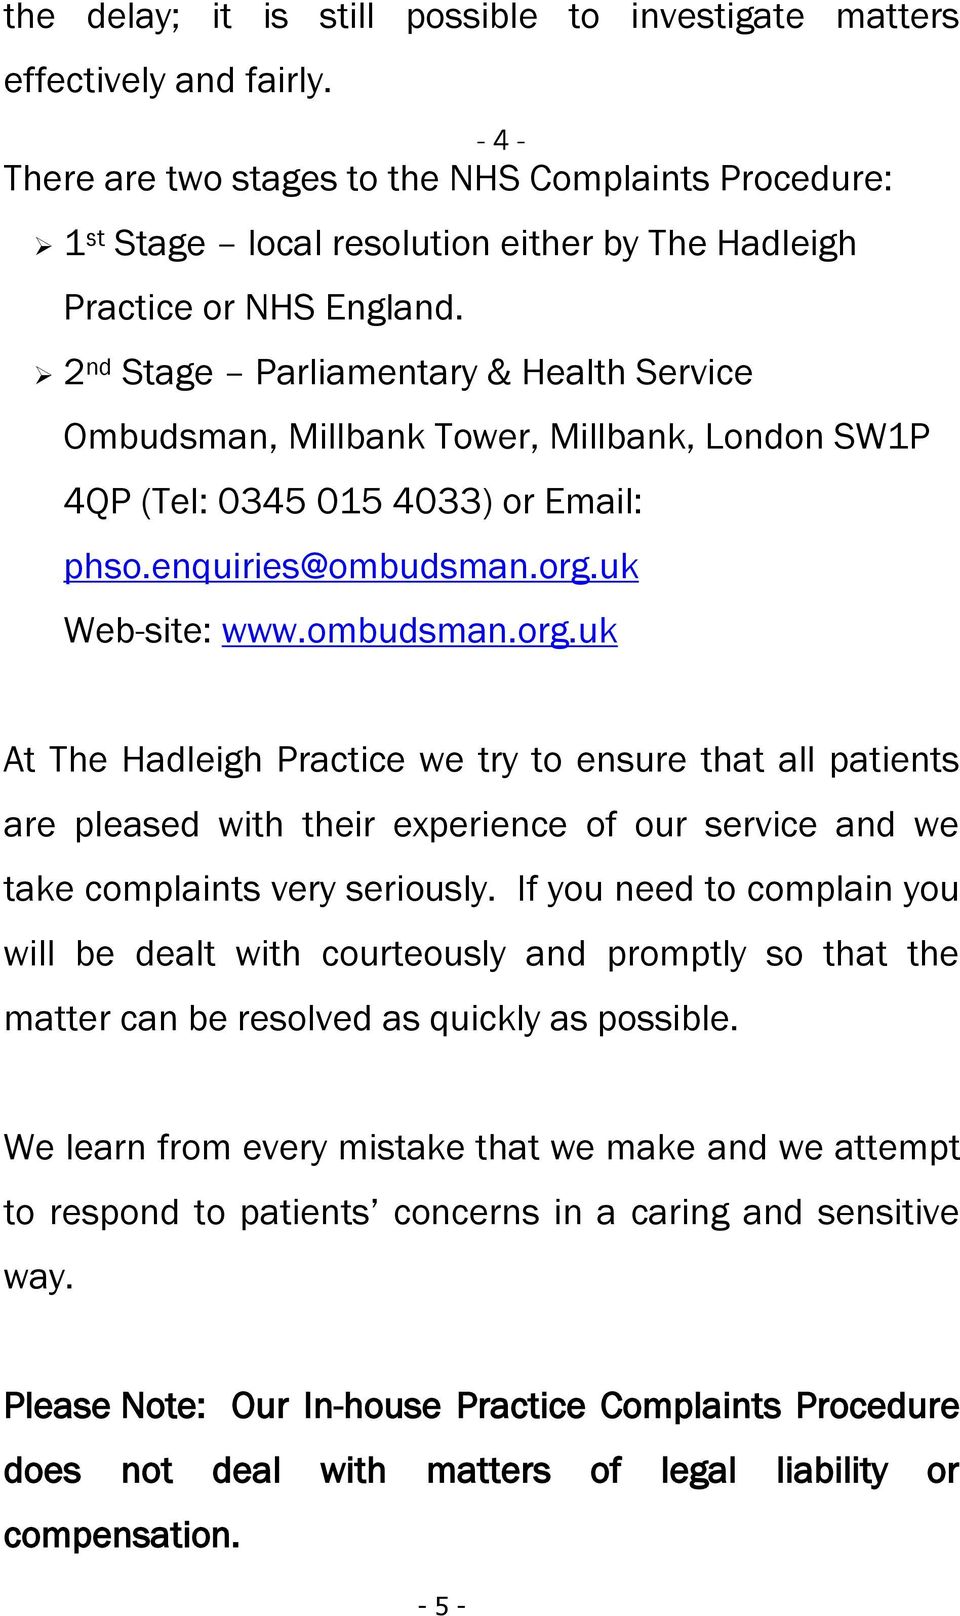 2 nd Stage Parliamentary & Health Service Ombudsman, Millbank Tower, Millbank, London SW1P 4QP (Tel: 0345 015 4033) or Email: phso.enquiries@ombudsman.org.